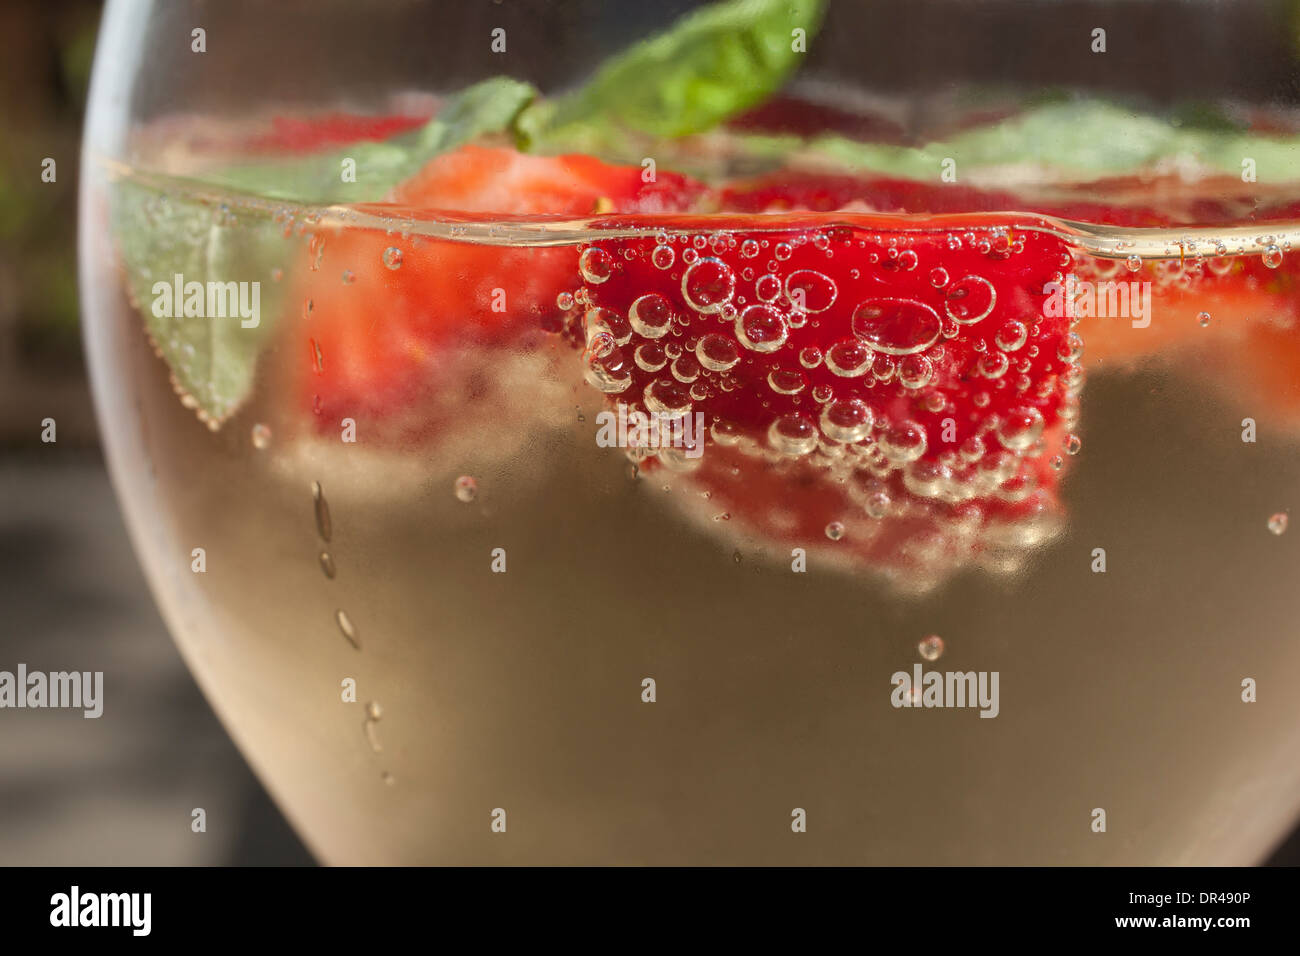 Basil and strawberry drink Stock Photo